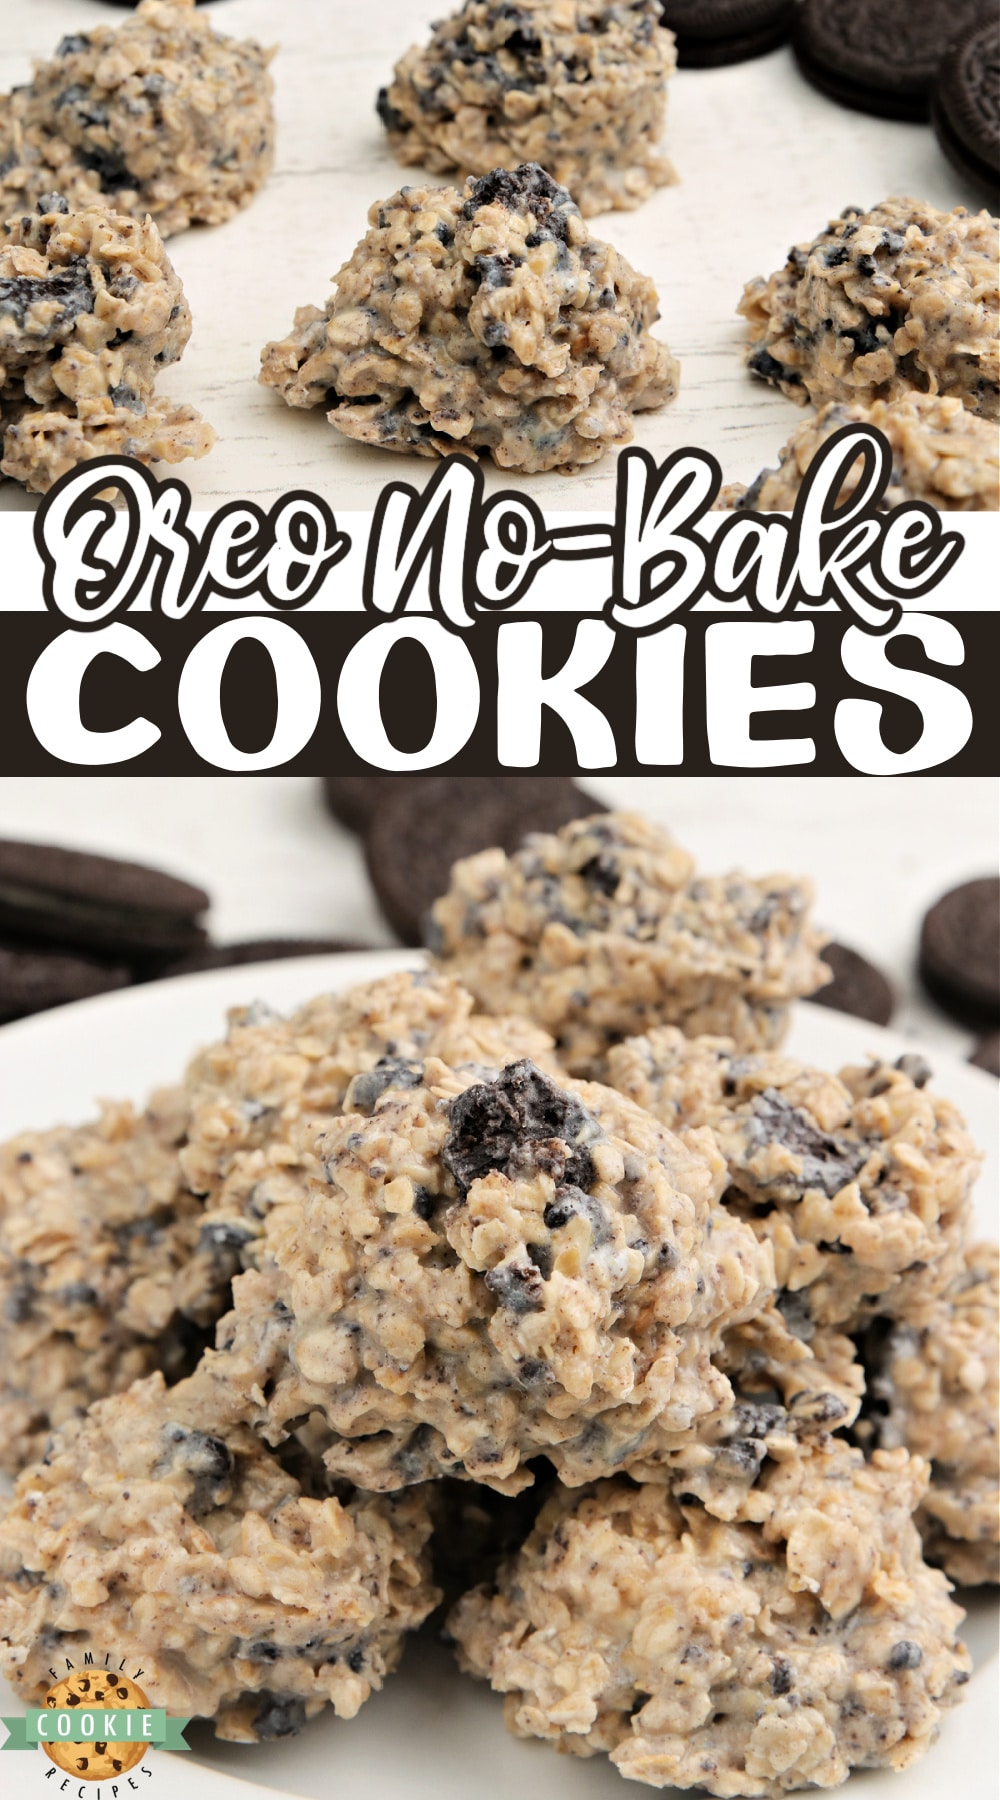 Oreo No Bake Cookies made with oats, Oreos and a few other simple ingredients. Delicious no bake cookie recipe packed with cookies and cream flavor! via @buttergirls